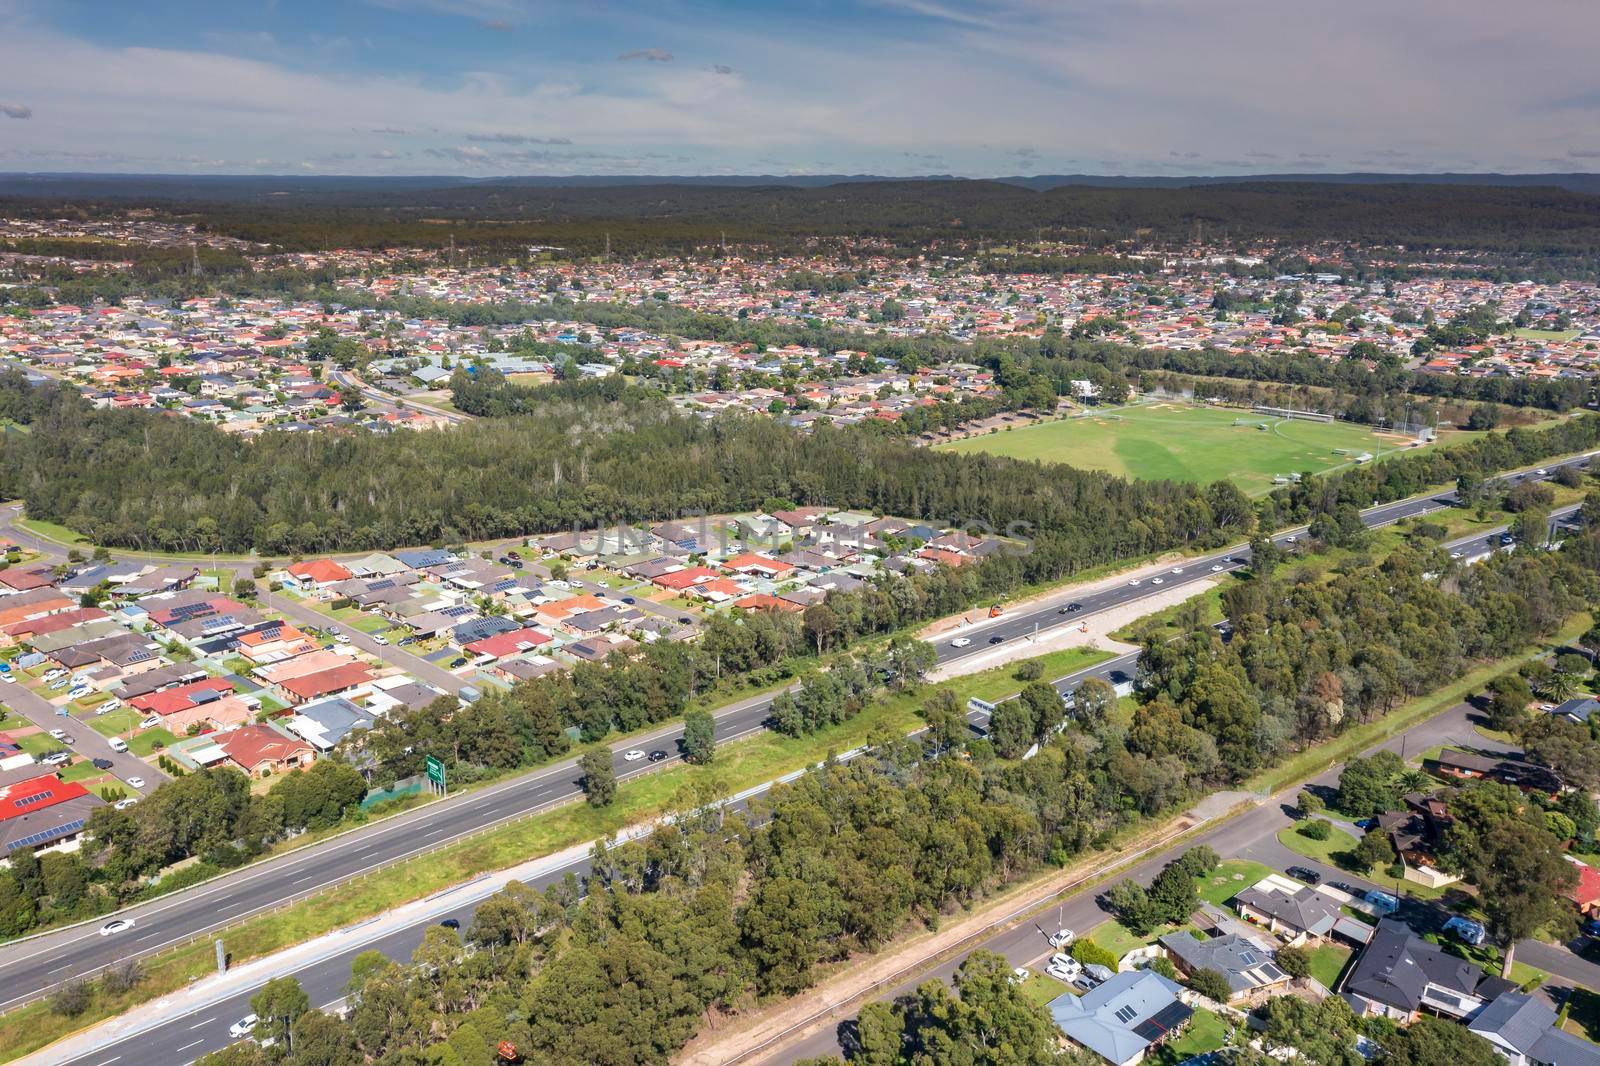 Aerial view of the suburb of South Penrith in greater Sydney in Australia by WittkePhotos